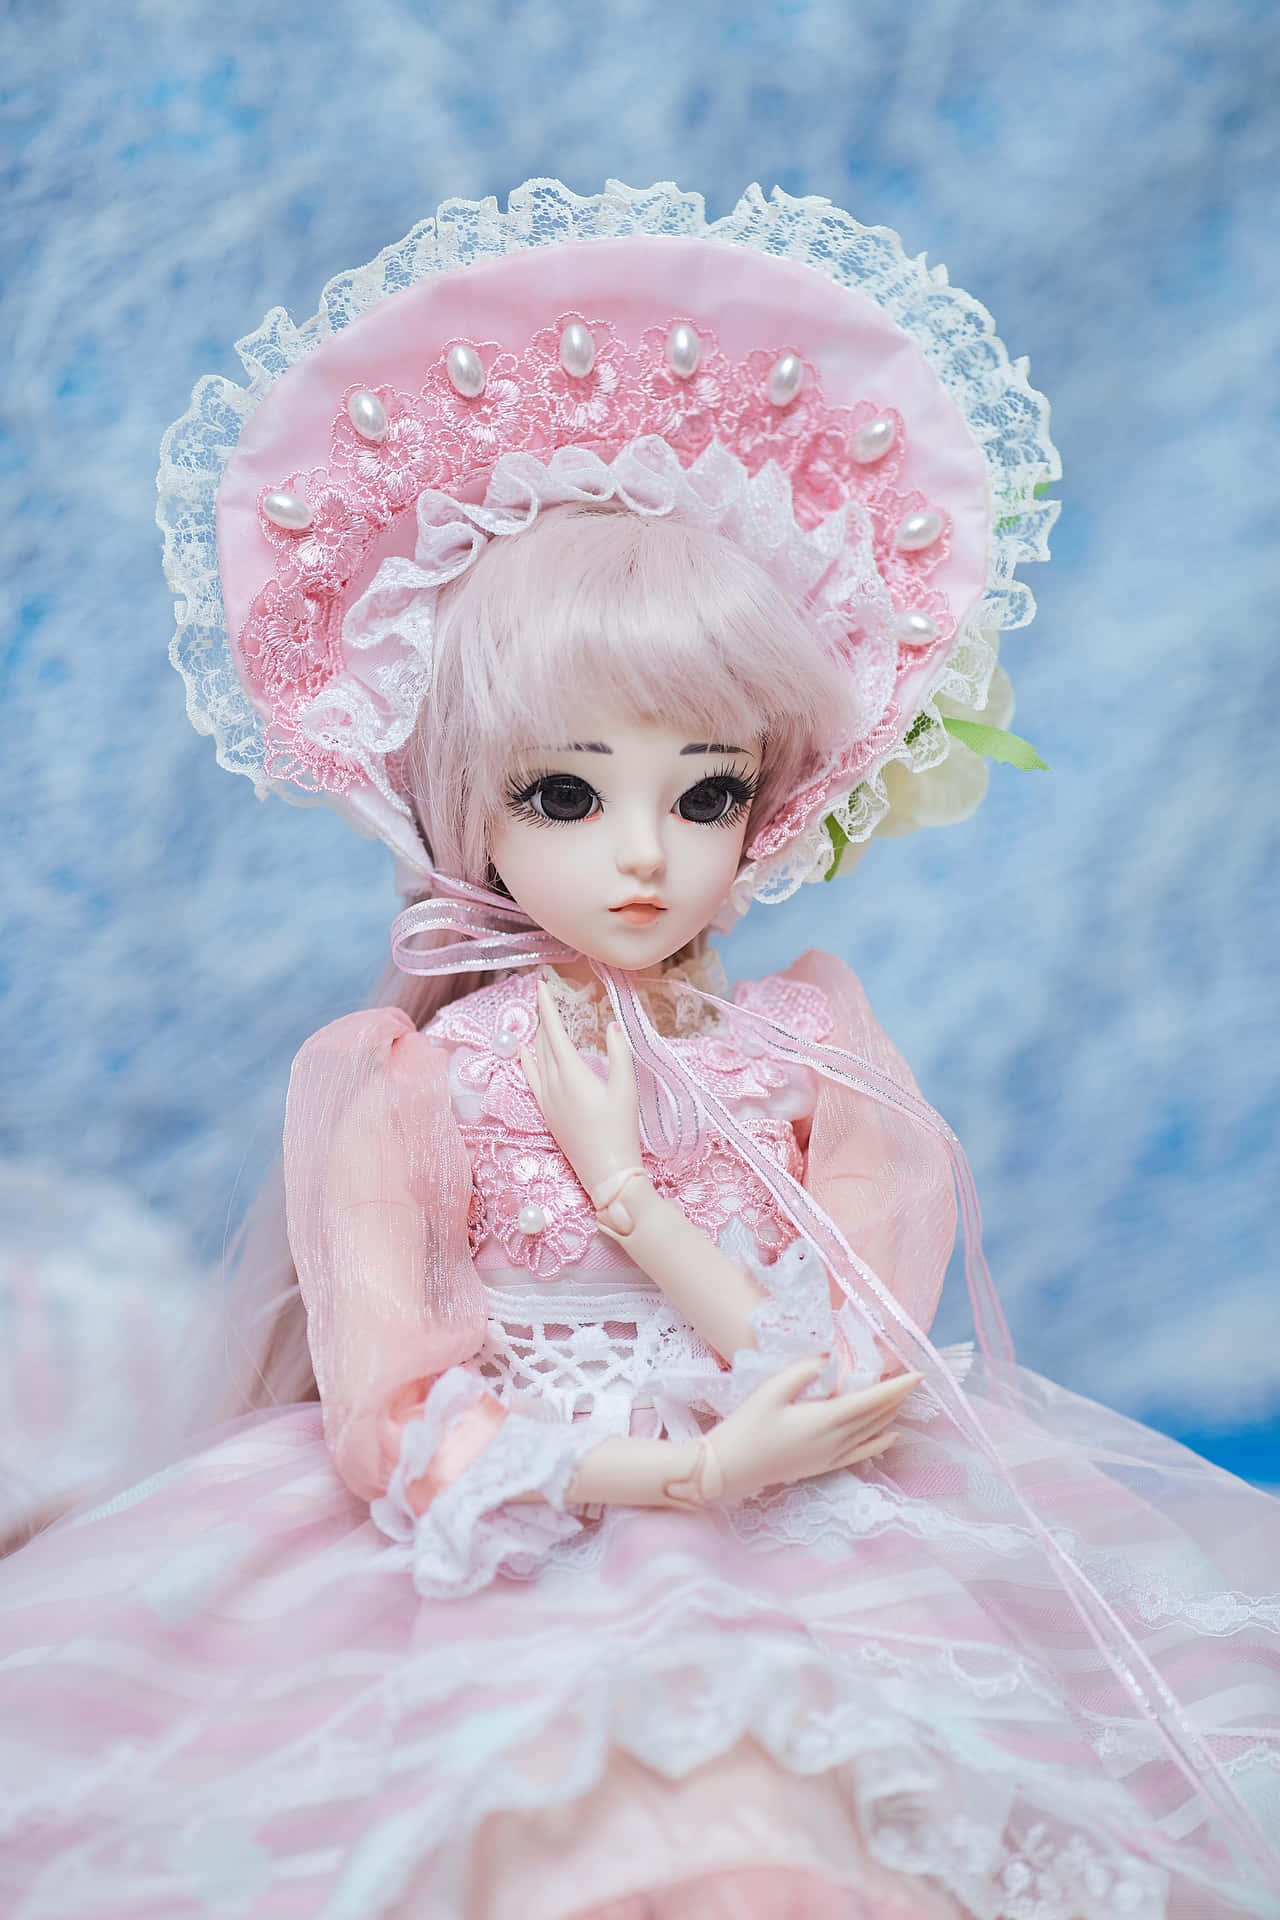 Doll Is Wearing A Pink Dress